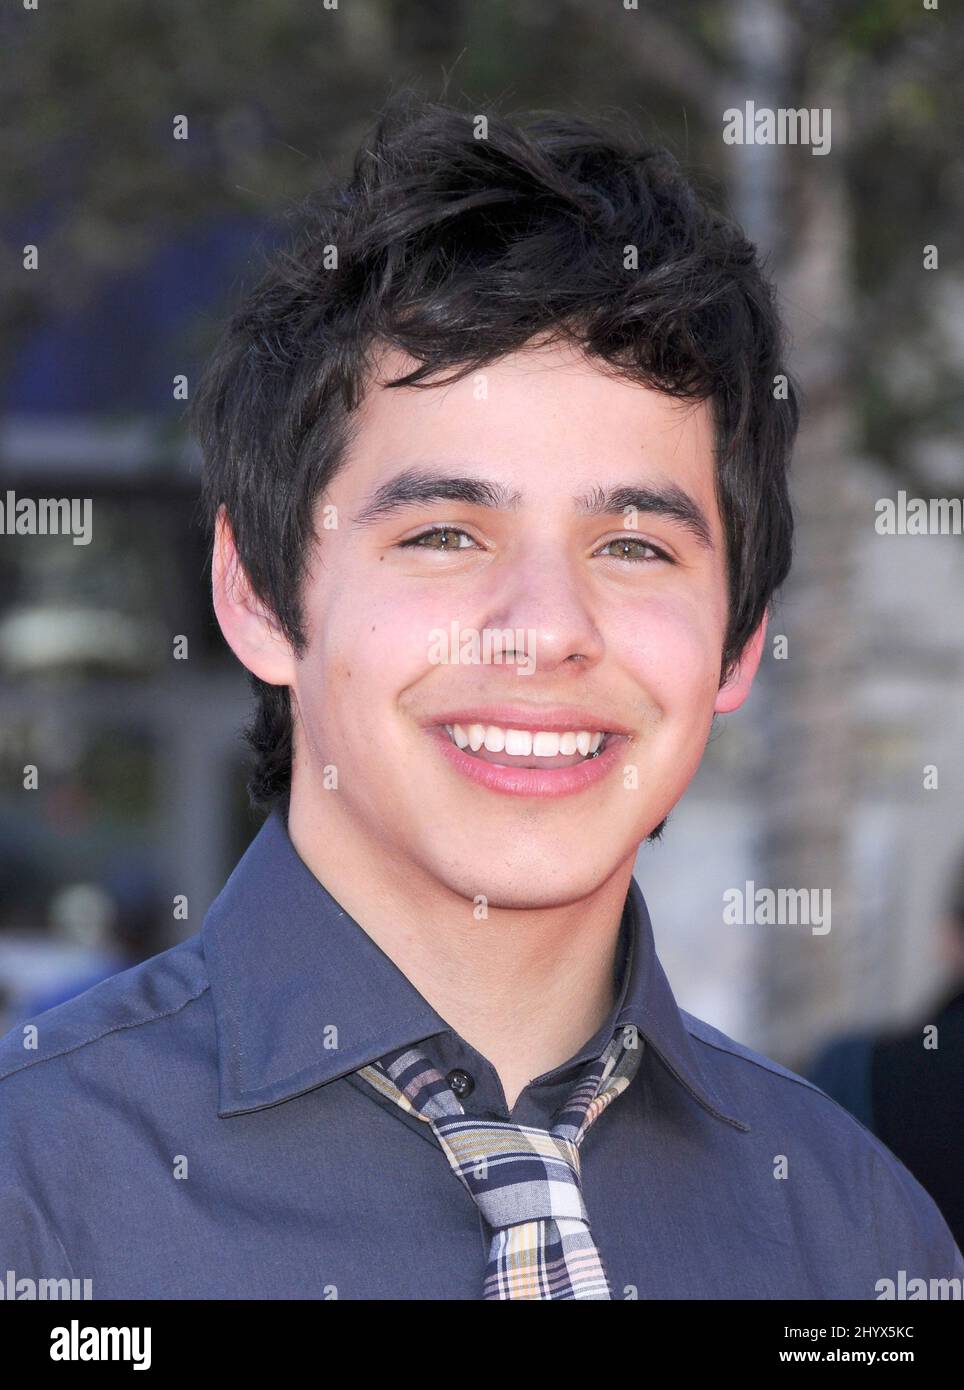 David Archuleta during the American Idol Grand Finale 2010 held at the Nokia Theatre, Los Angeles, California Stock Photo